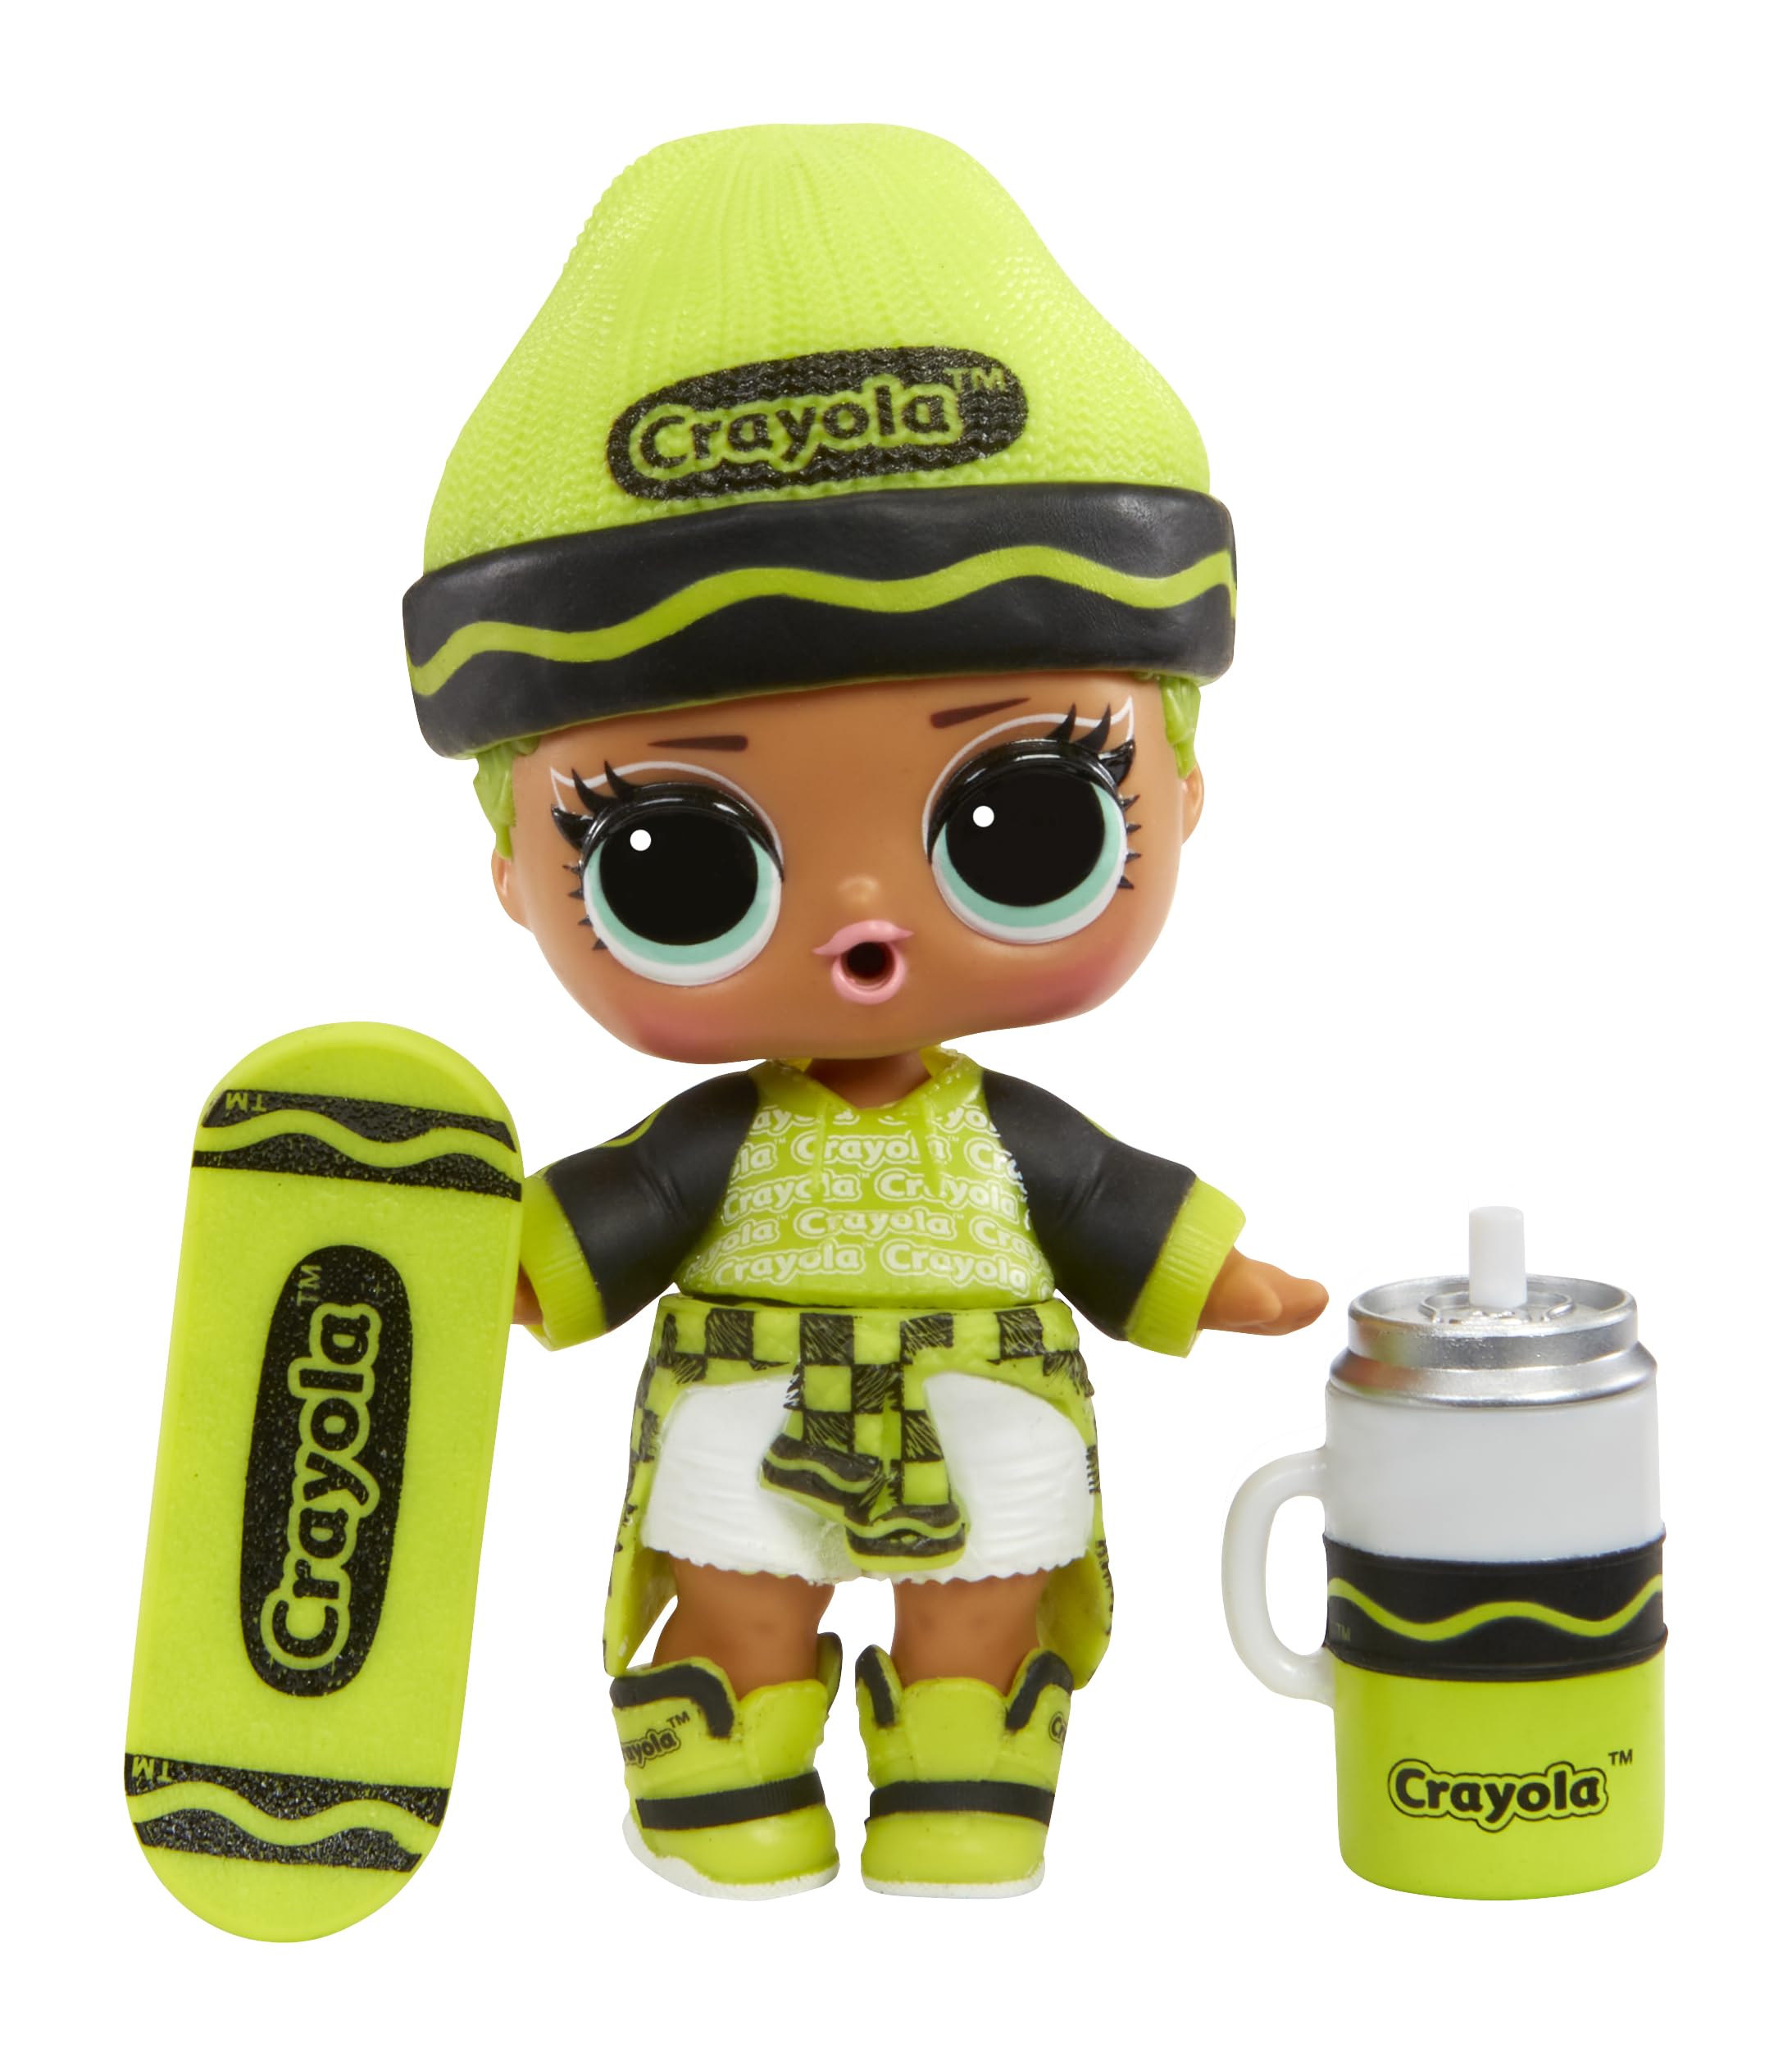 L.O.L. Surprise! Loves CRAYOLA Tots - with Collectible Doll, 7 Surprises, Crayola Dolls, Color Theme, Crayon Dolls, Surprise Doll, Limited Edition Doll- Great gift for Girls age 3+